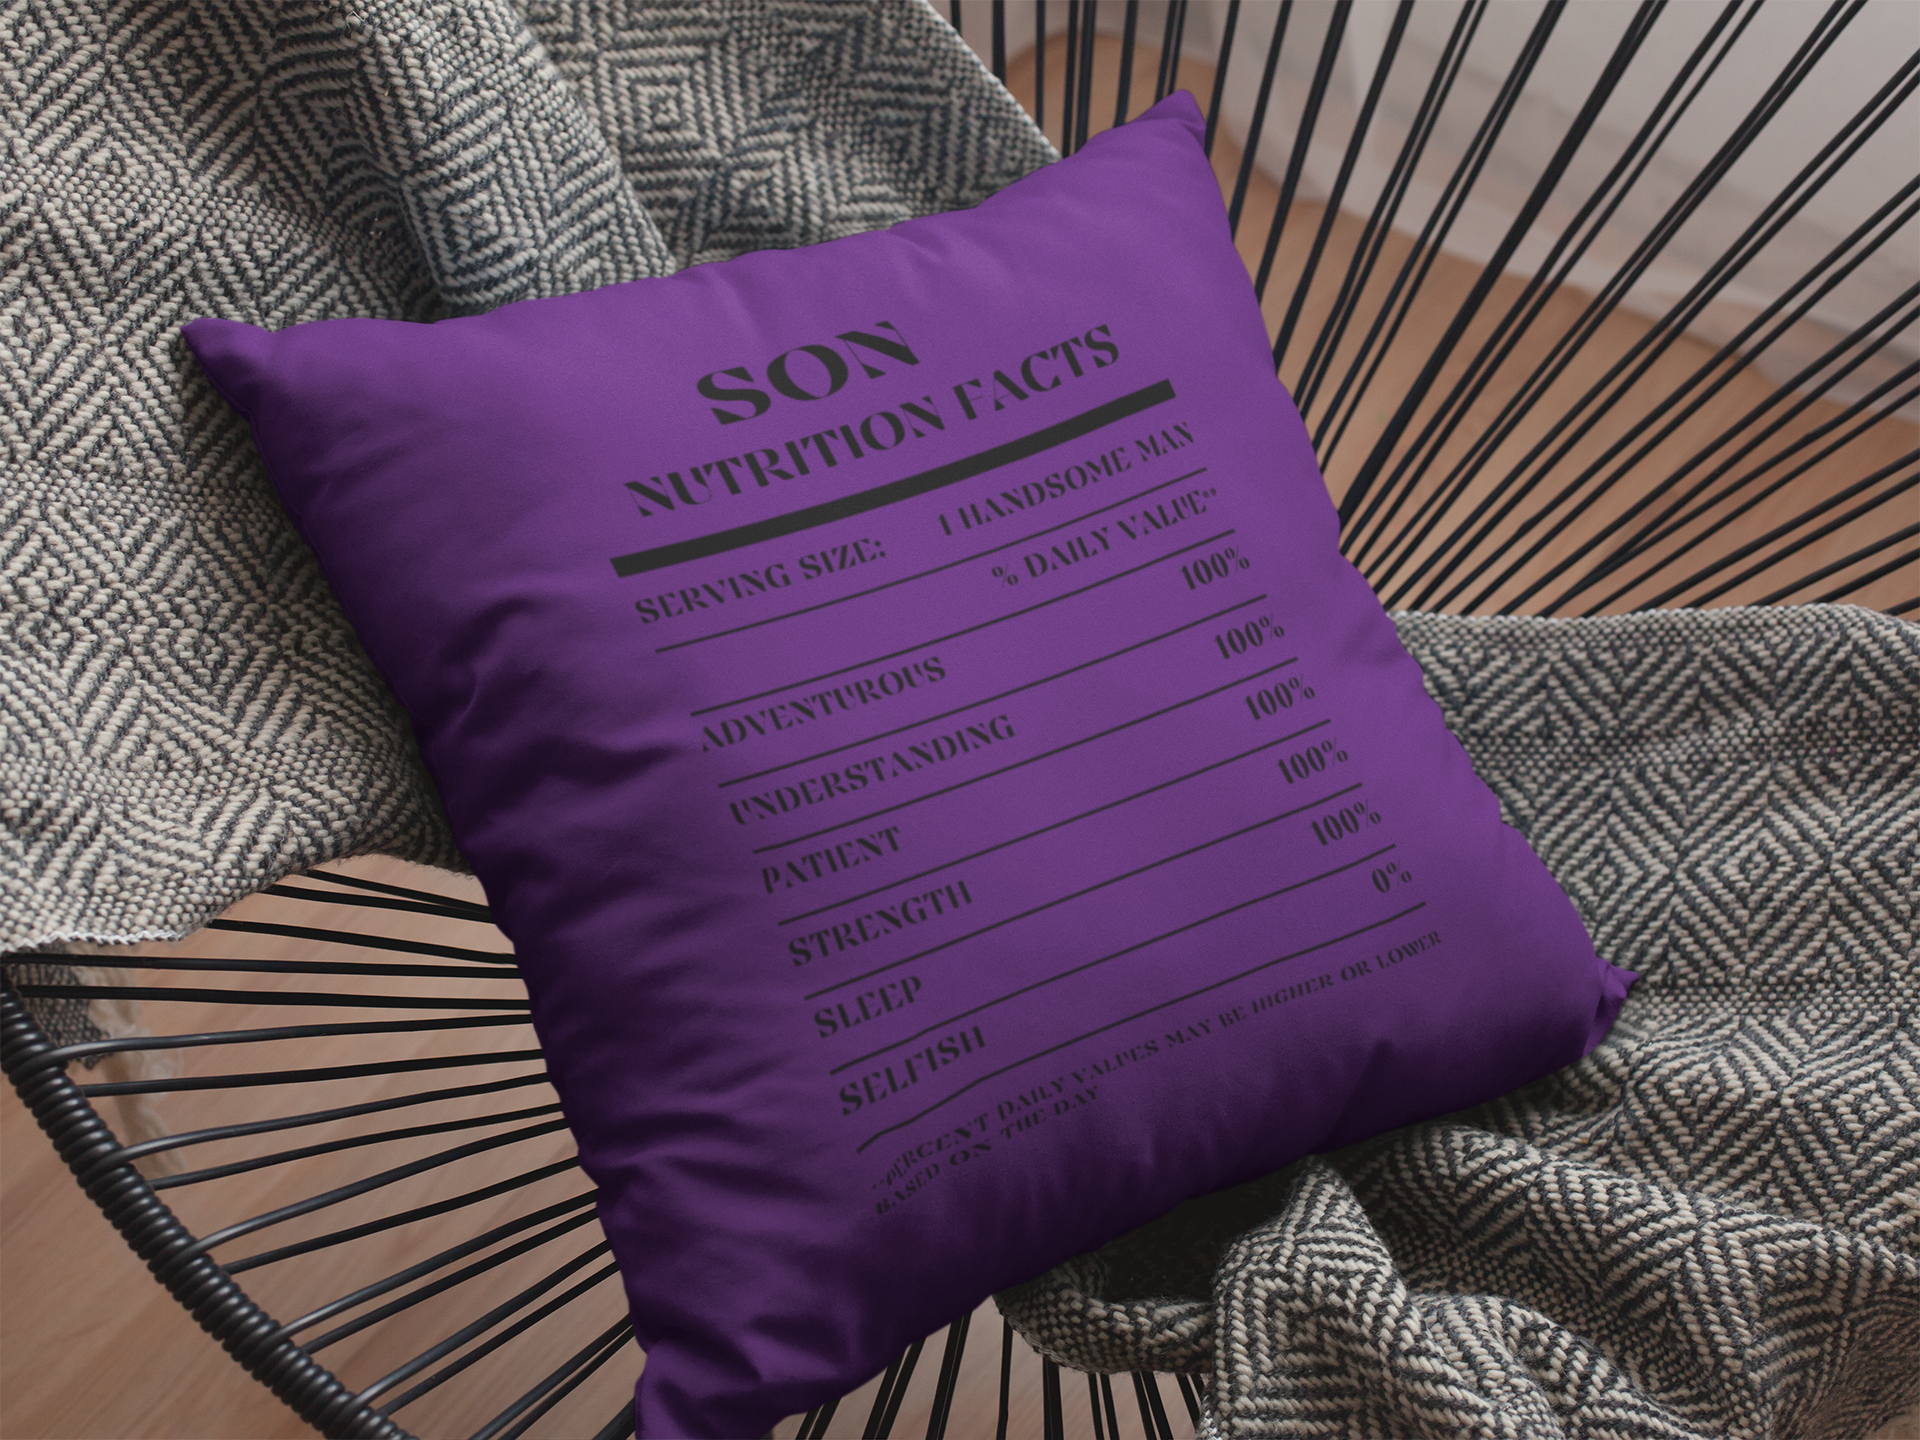 Nutrition Facts Pillow - Son - Black